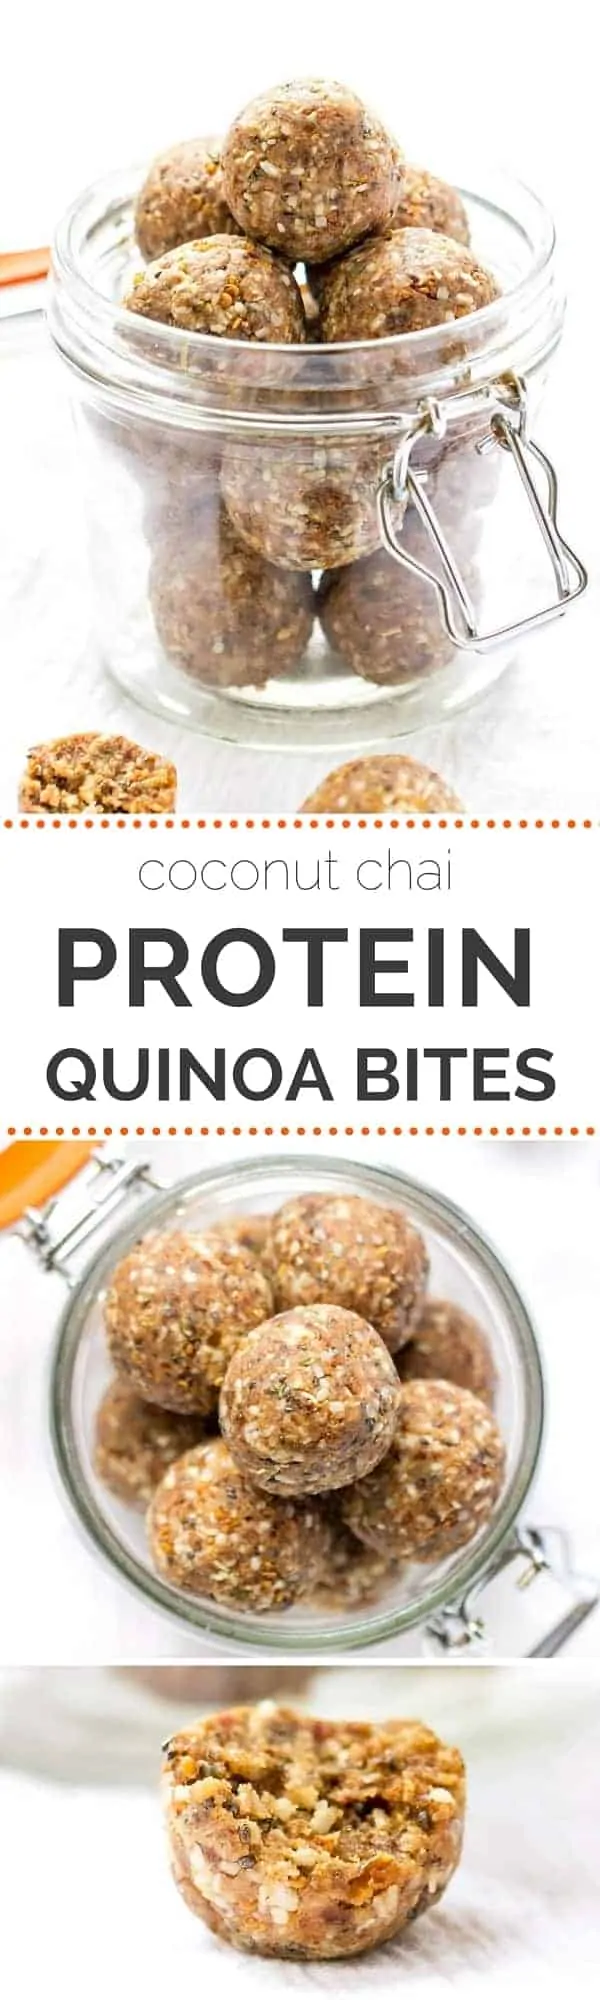 HIGH PROTEIN! Quinoa Energy Bites -- high protein in a delicious coconut-chai flavor. Great snack or post-workout! (naturally gluten-free + vegan)